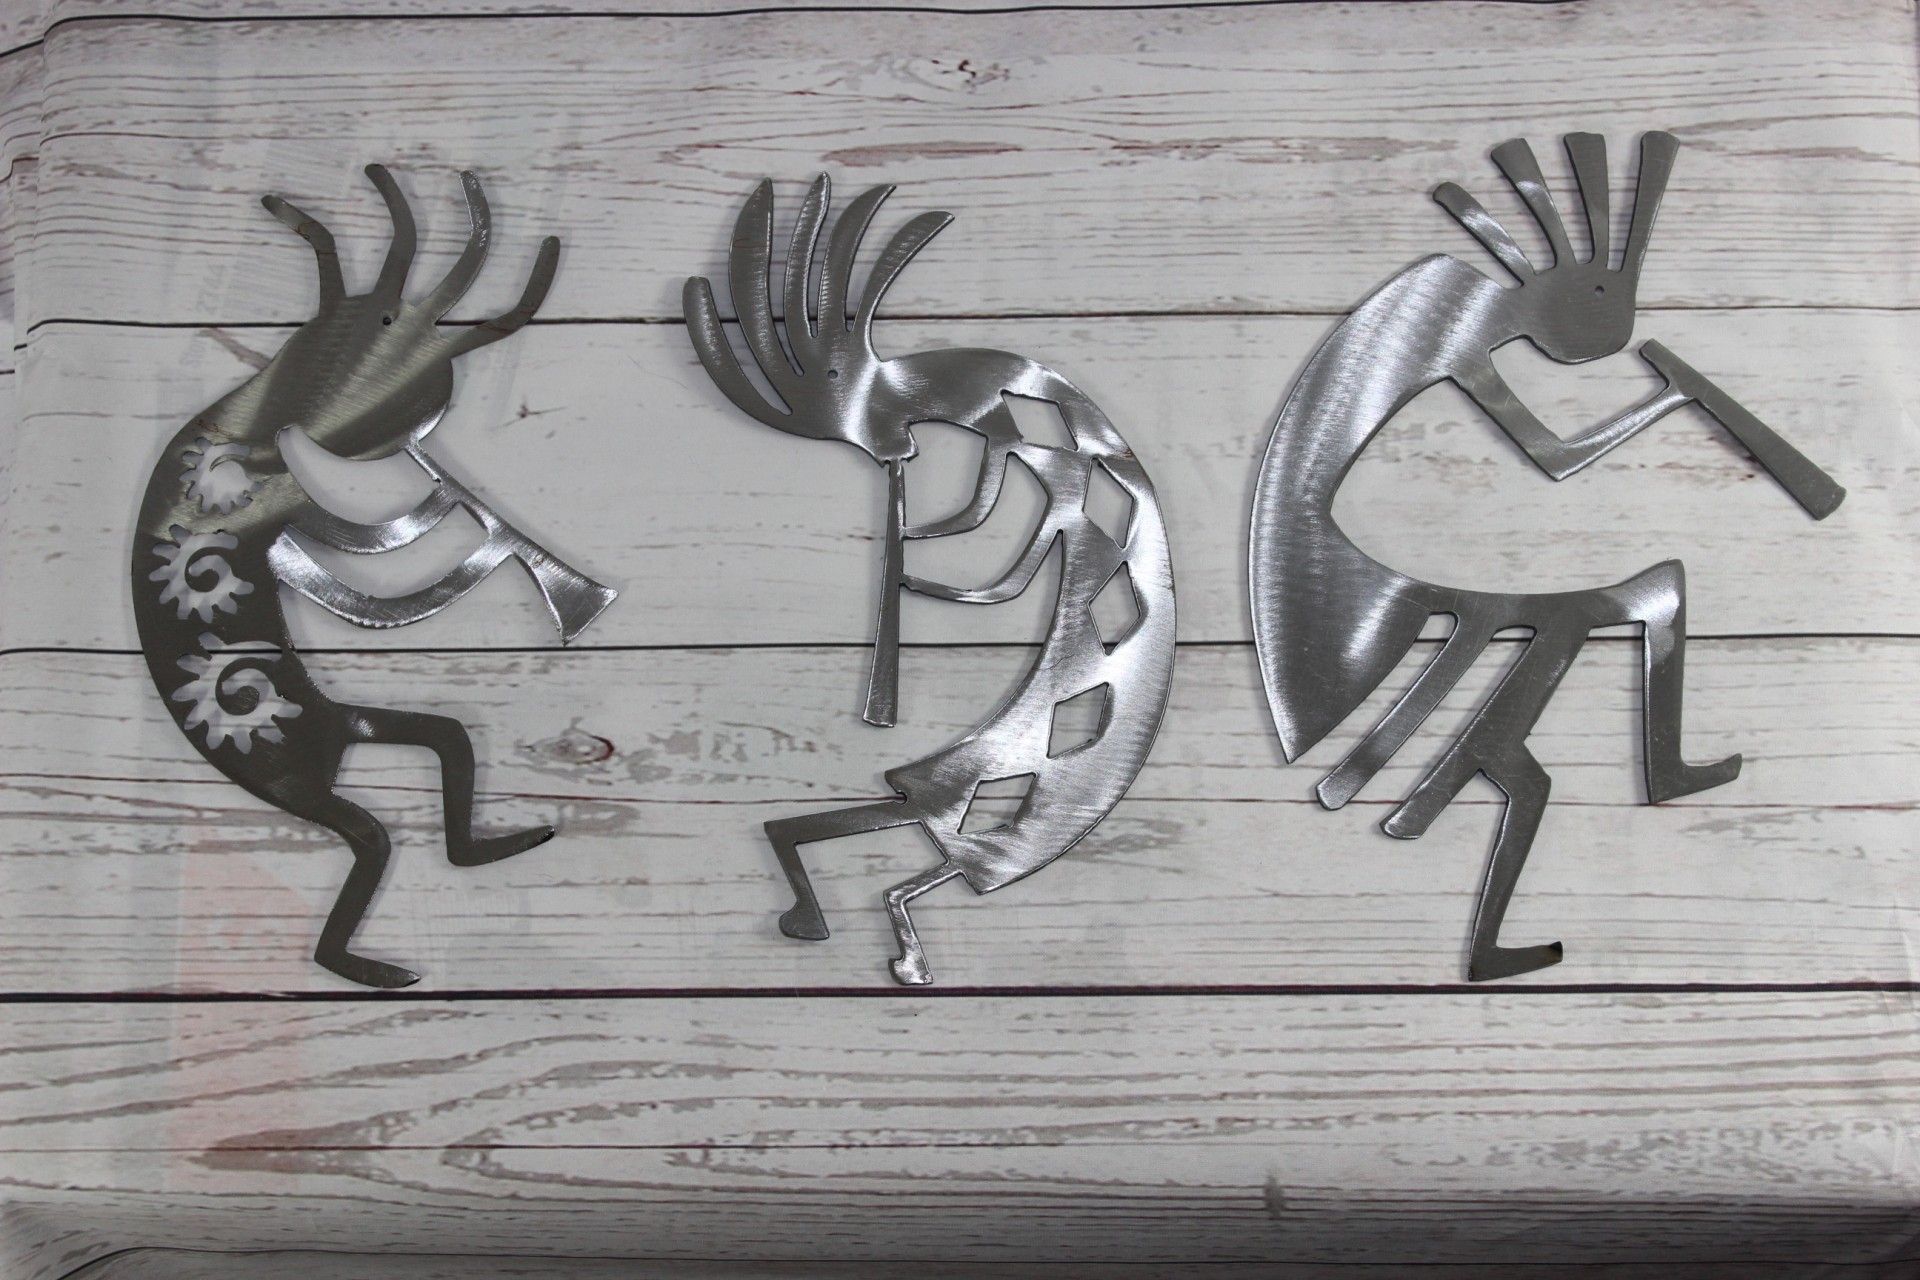 Kokopelli Spirit Of Music Metal Wall Art (3 Piece Set) With Most Recently Released 3 Piece Metal Wall Art Set (View 17 of 20)